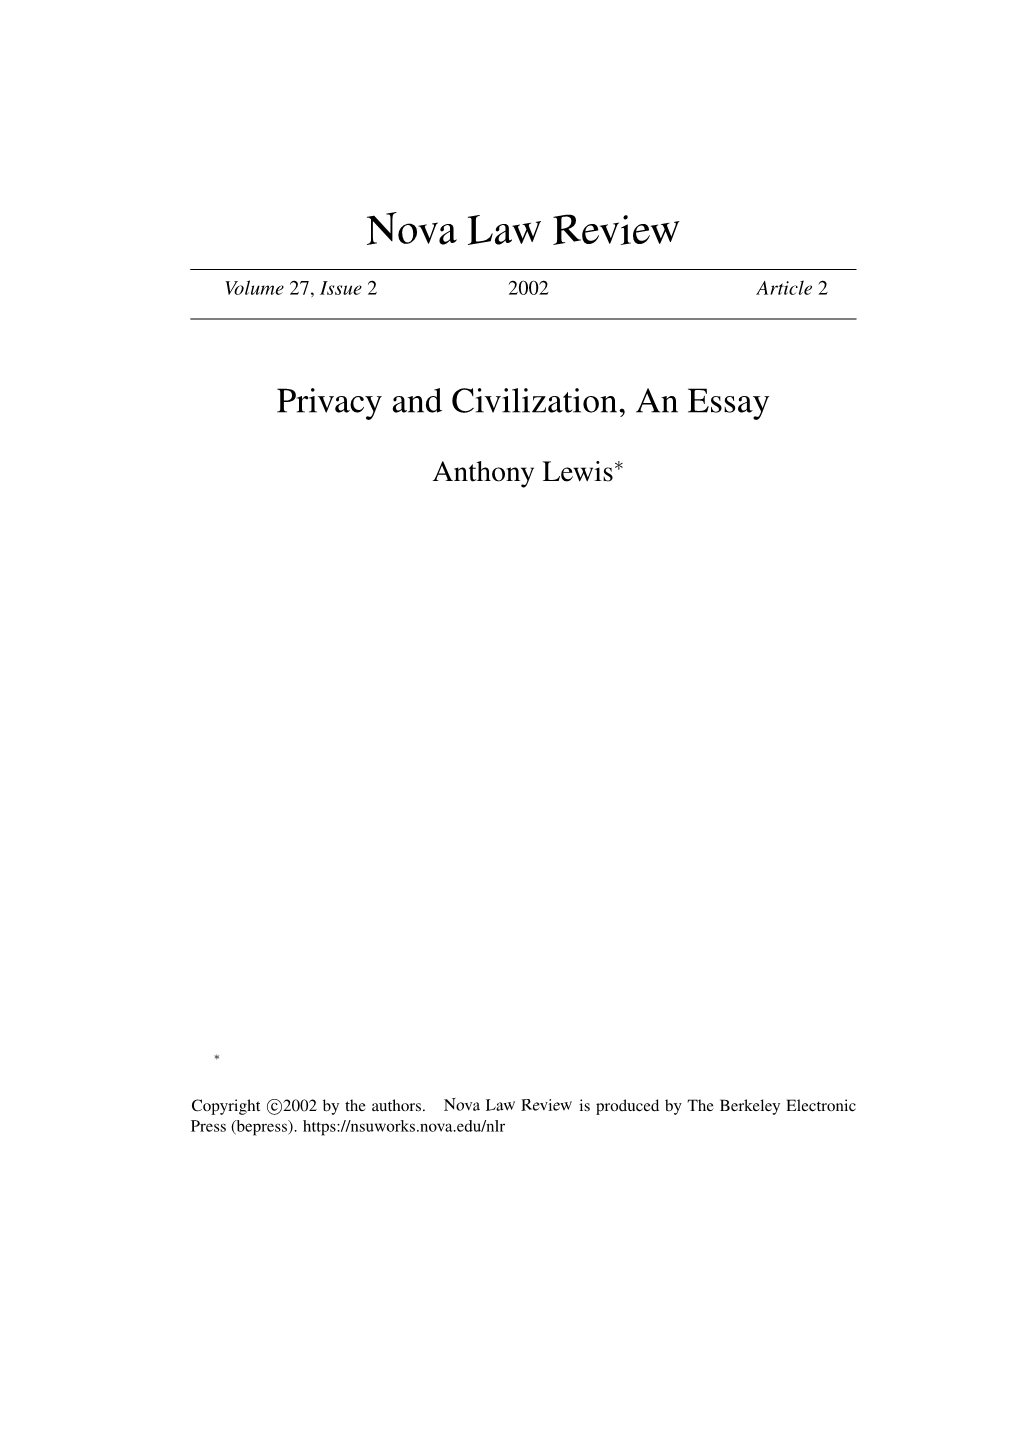 Privacy and Civilization, an Essay